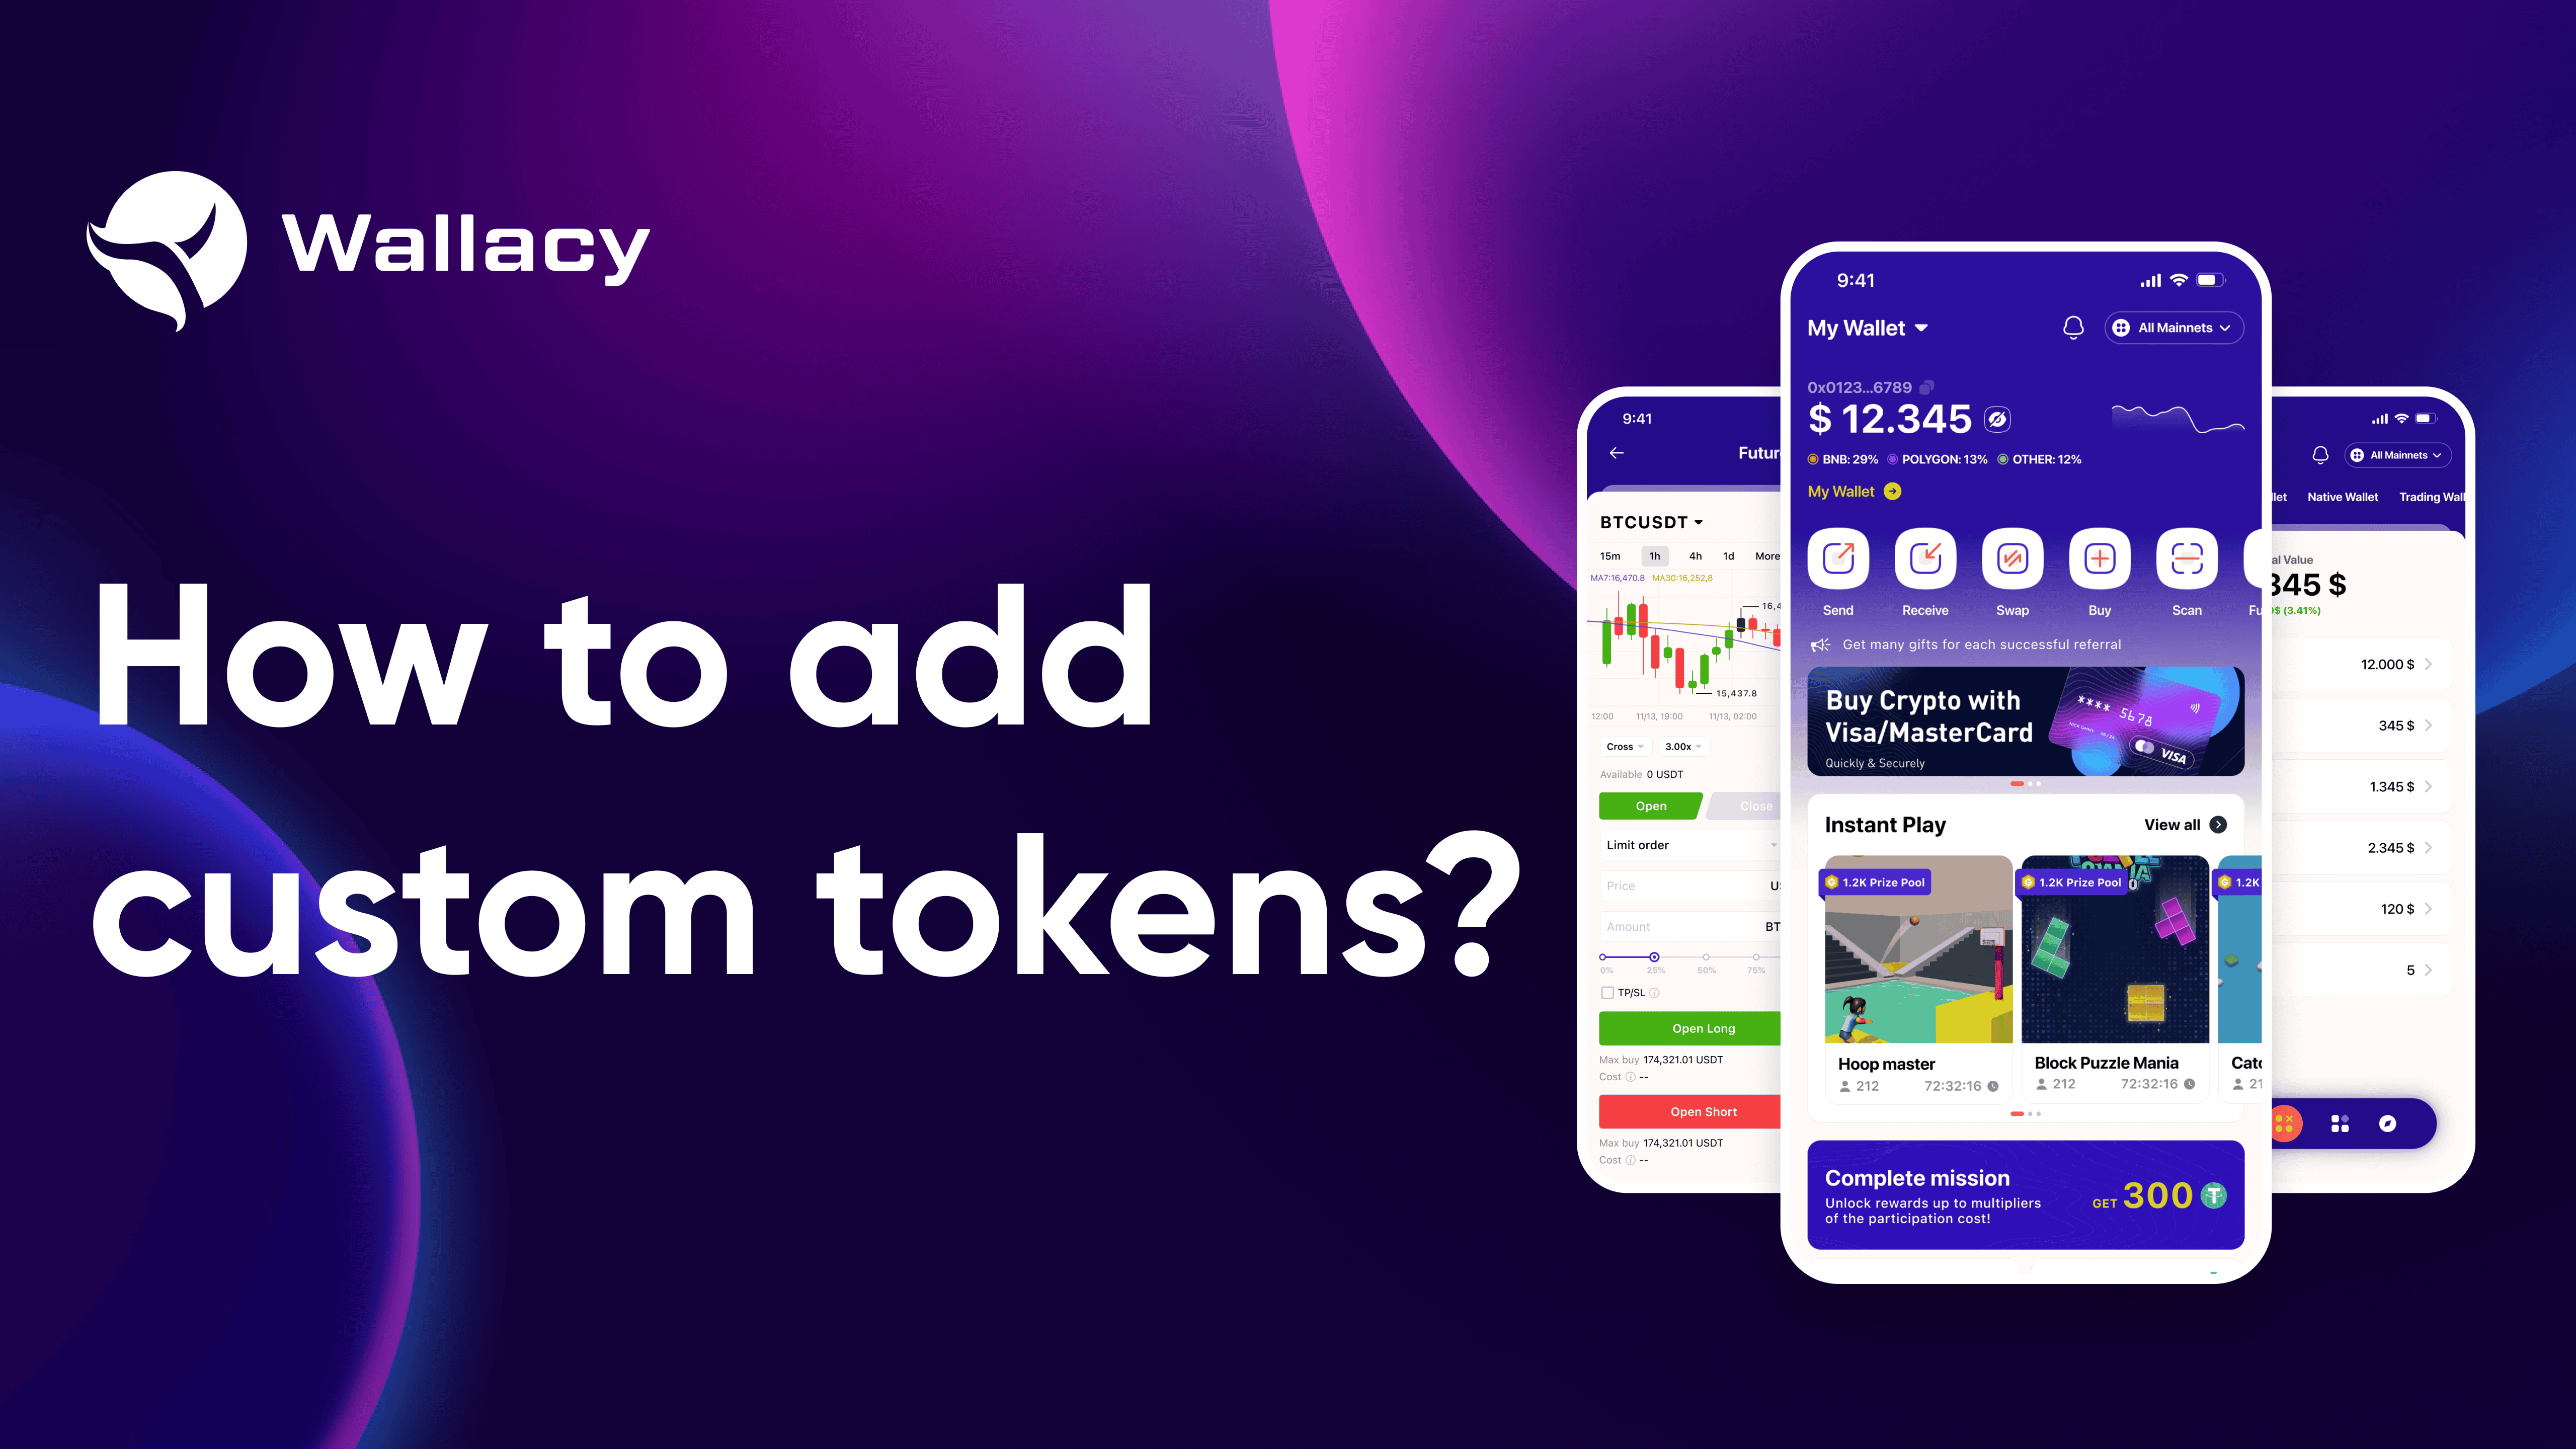 How to add custom tokens to wallet?